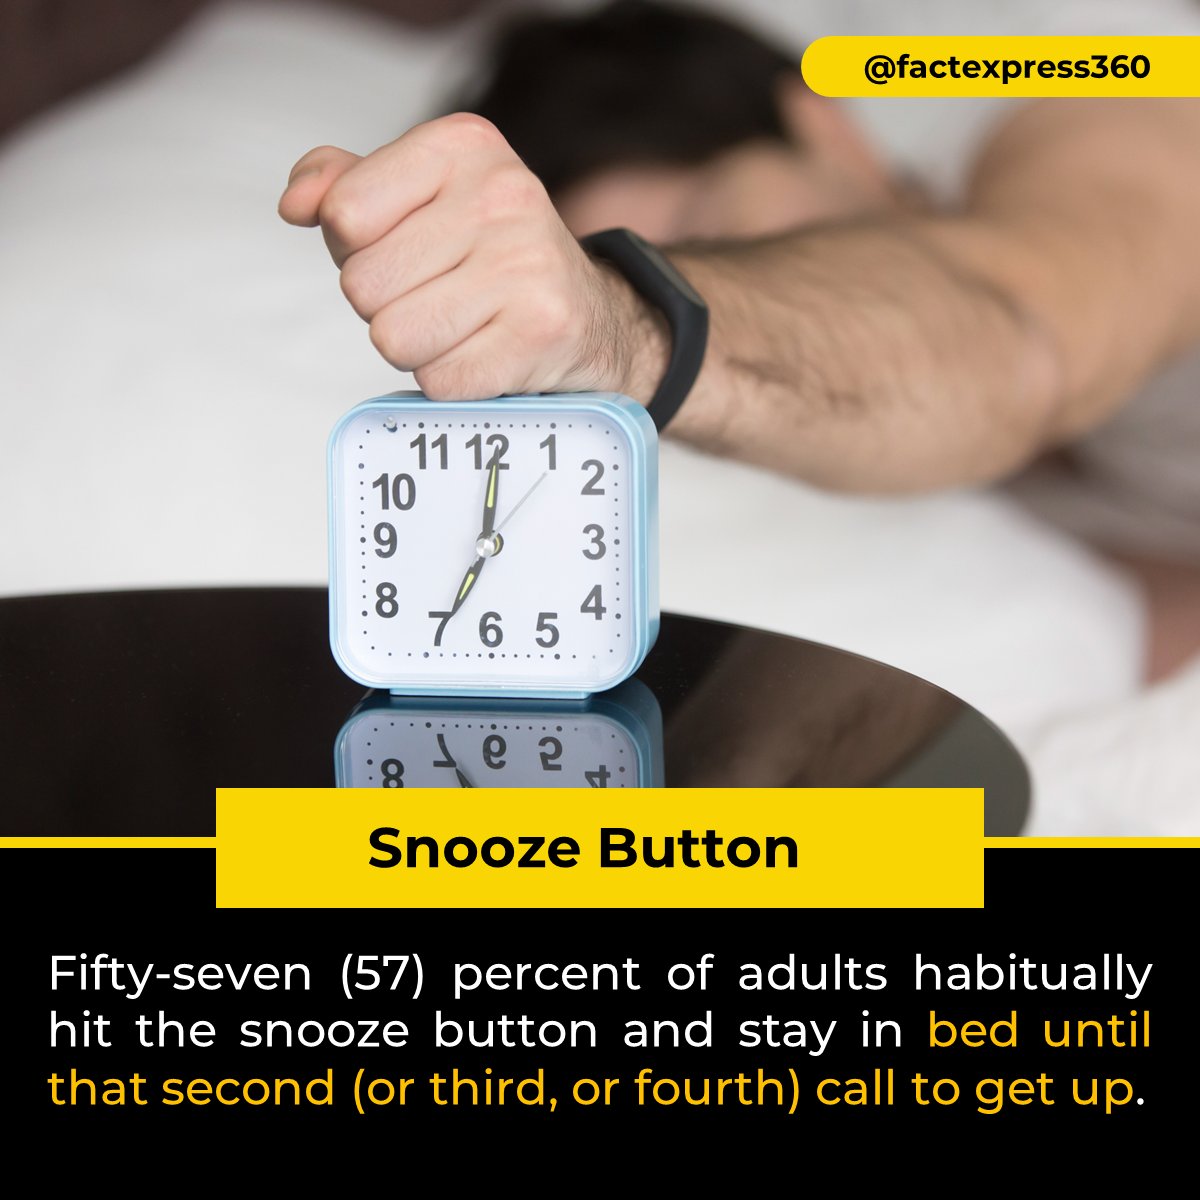 If you often reach for the snooze button when your alarm wakes you up each morning, you're not the only one: a new study found 57 percent of adults habitually stayed in bed until that second (or third, or fourth) call to get up.

#humanfacts #earlymorning #factexpress #facts